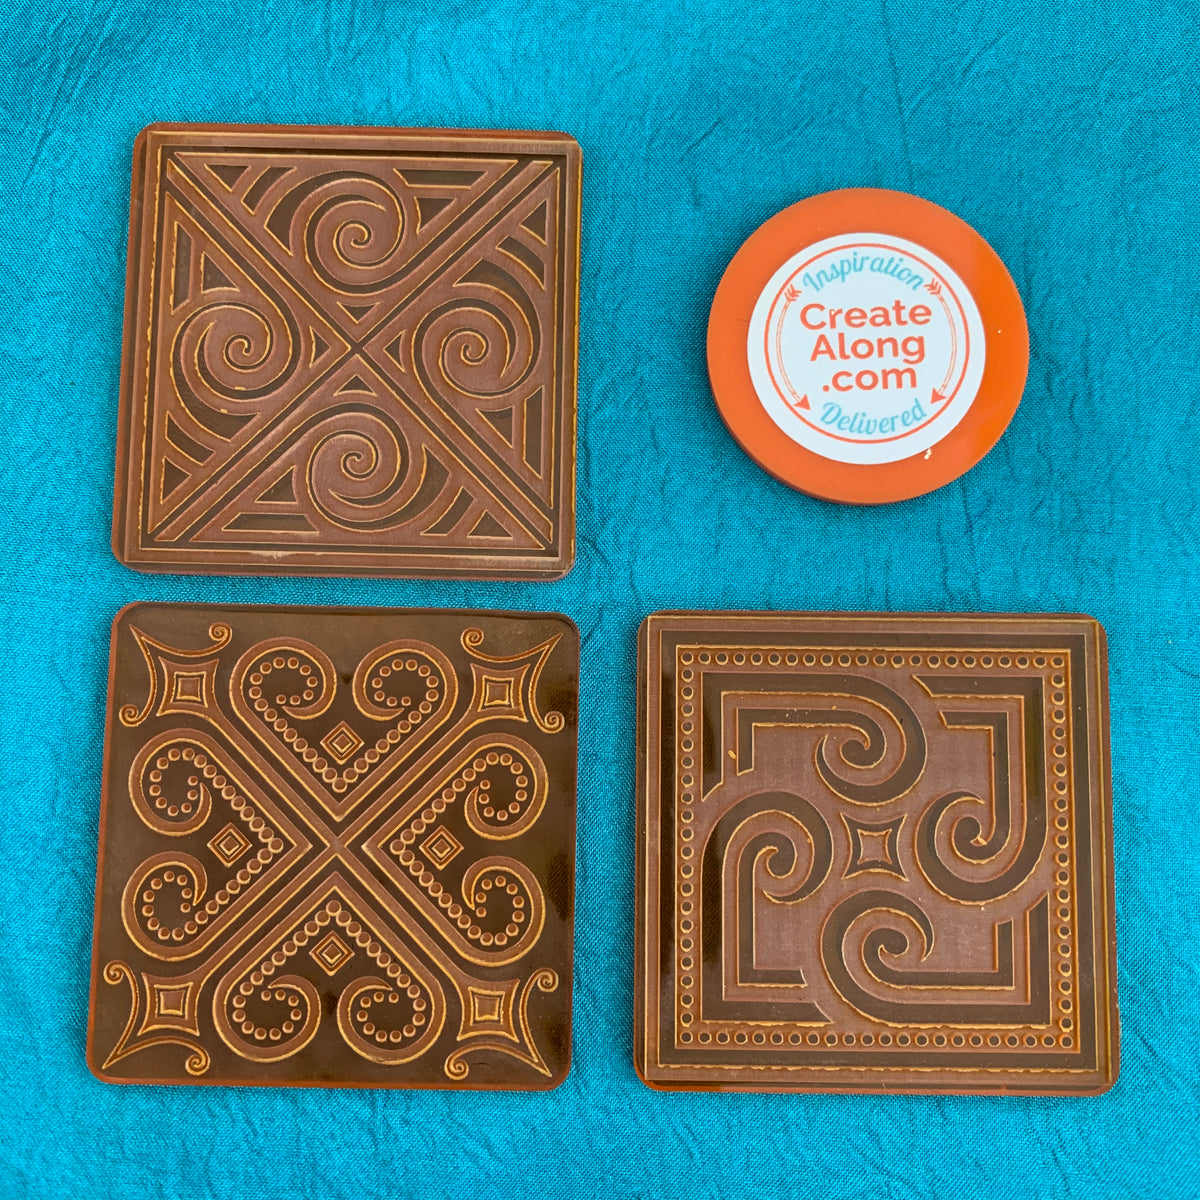 Deco Disc Stained Glass Tiles Stamp and Texture Pattern Designs for Polymer Clay